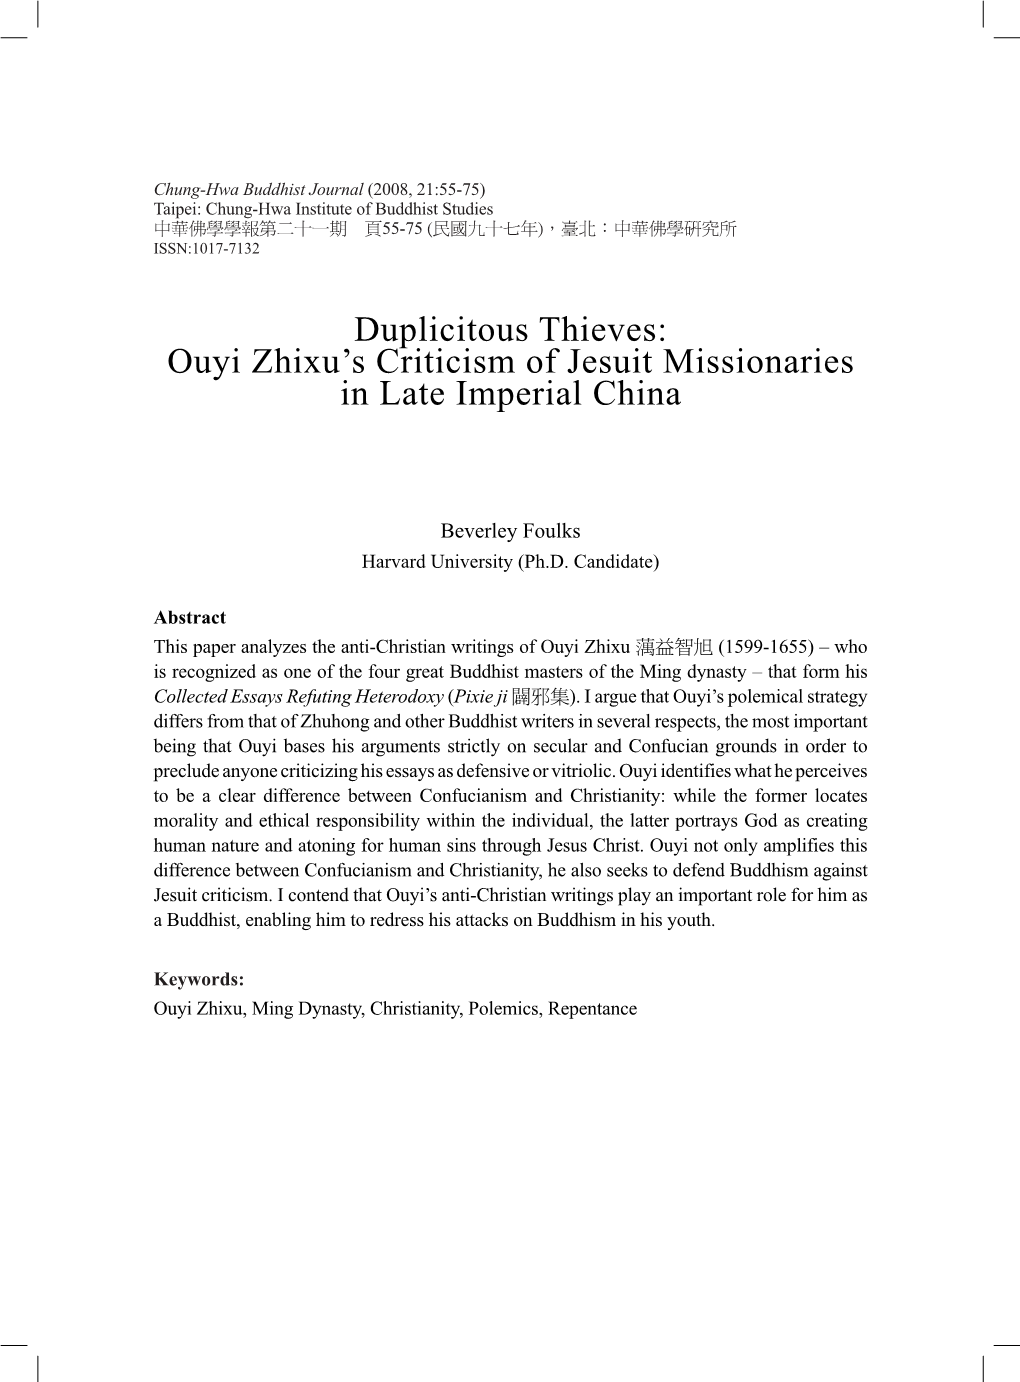 Ouyi Zhixu's Criticism of Jesuit Missionaries in Late Imperial China